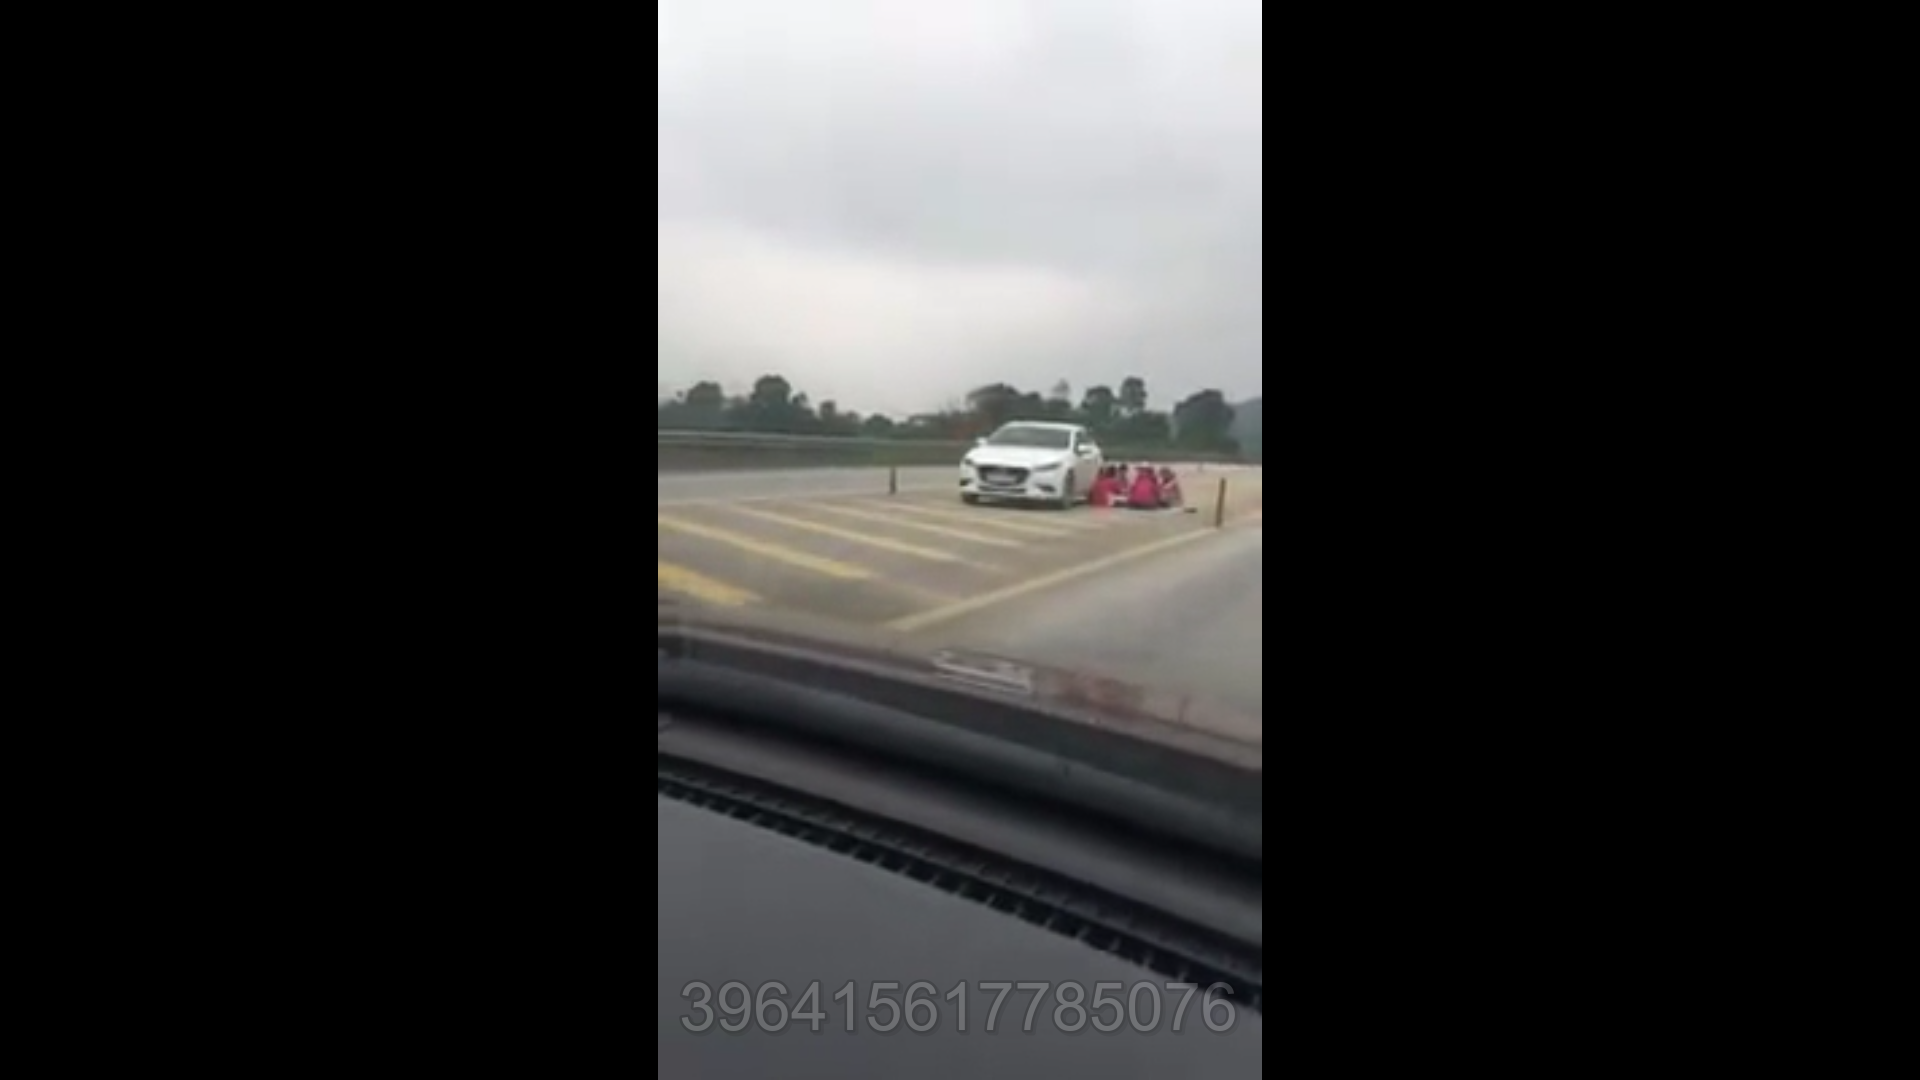 Another group filmed picnicking on expressway in northern Vietnam